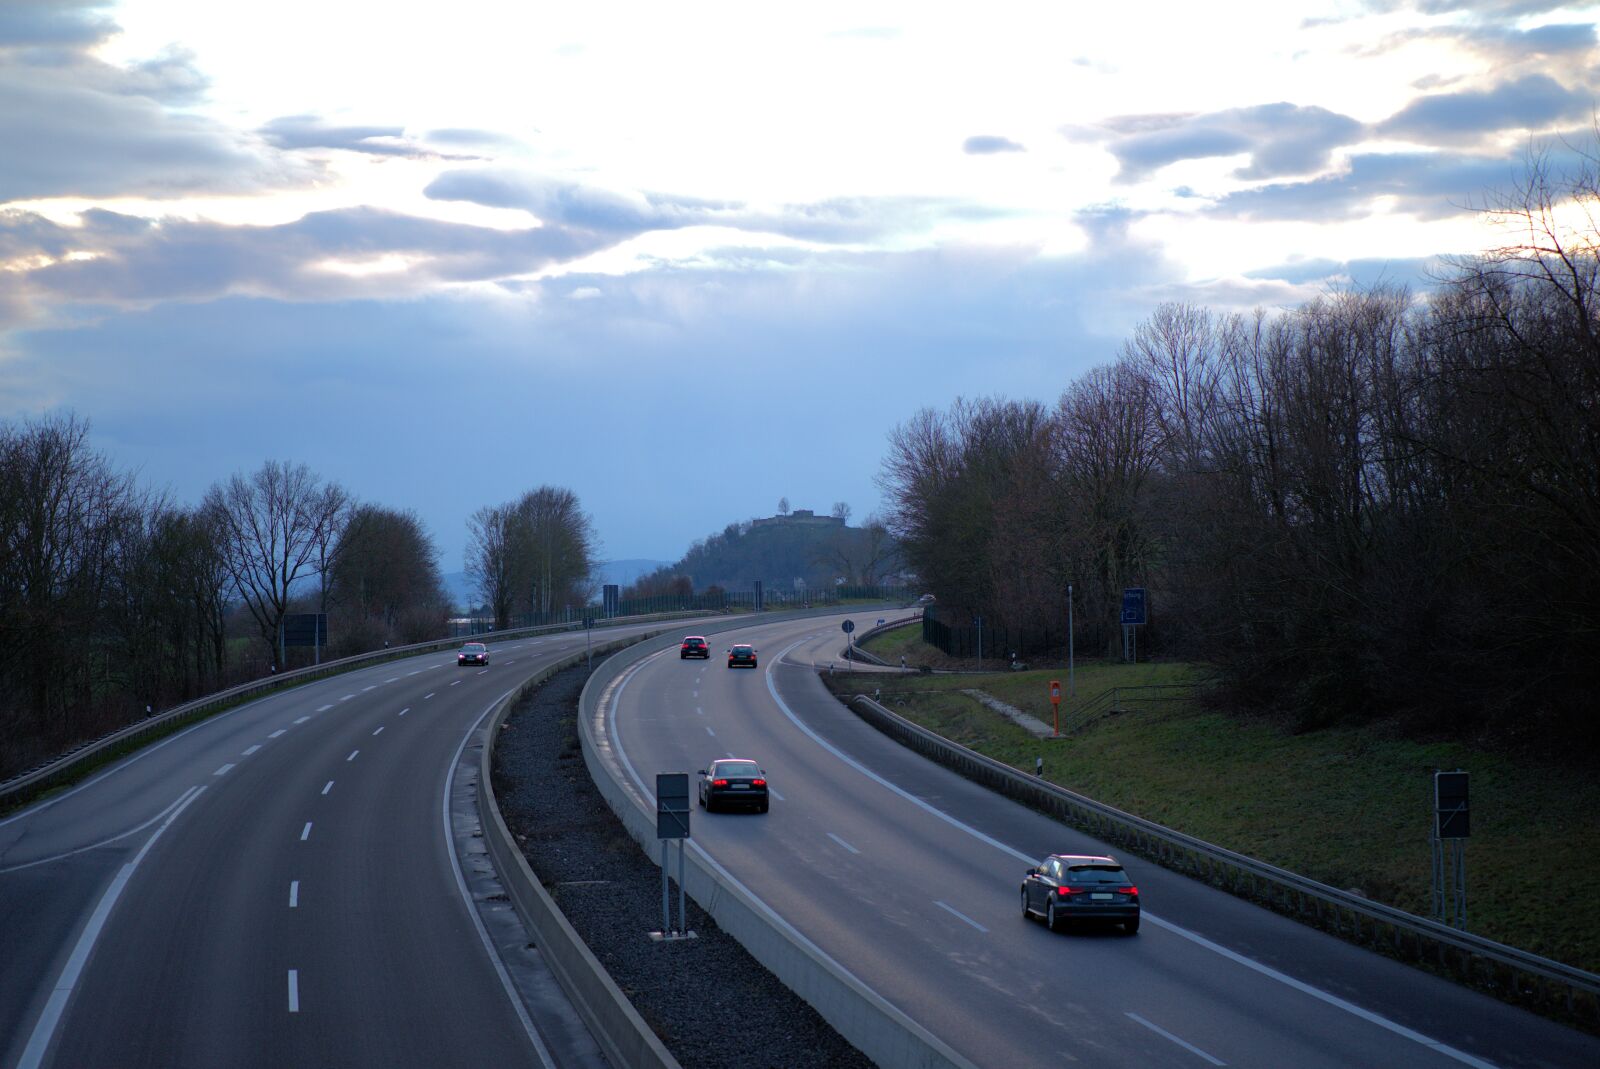 ZEISS Batis 85mm F1.8 sample photo. Highway, road, auto photography